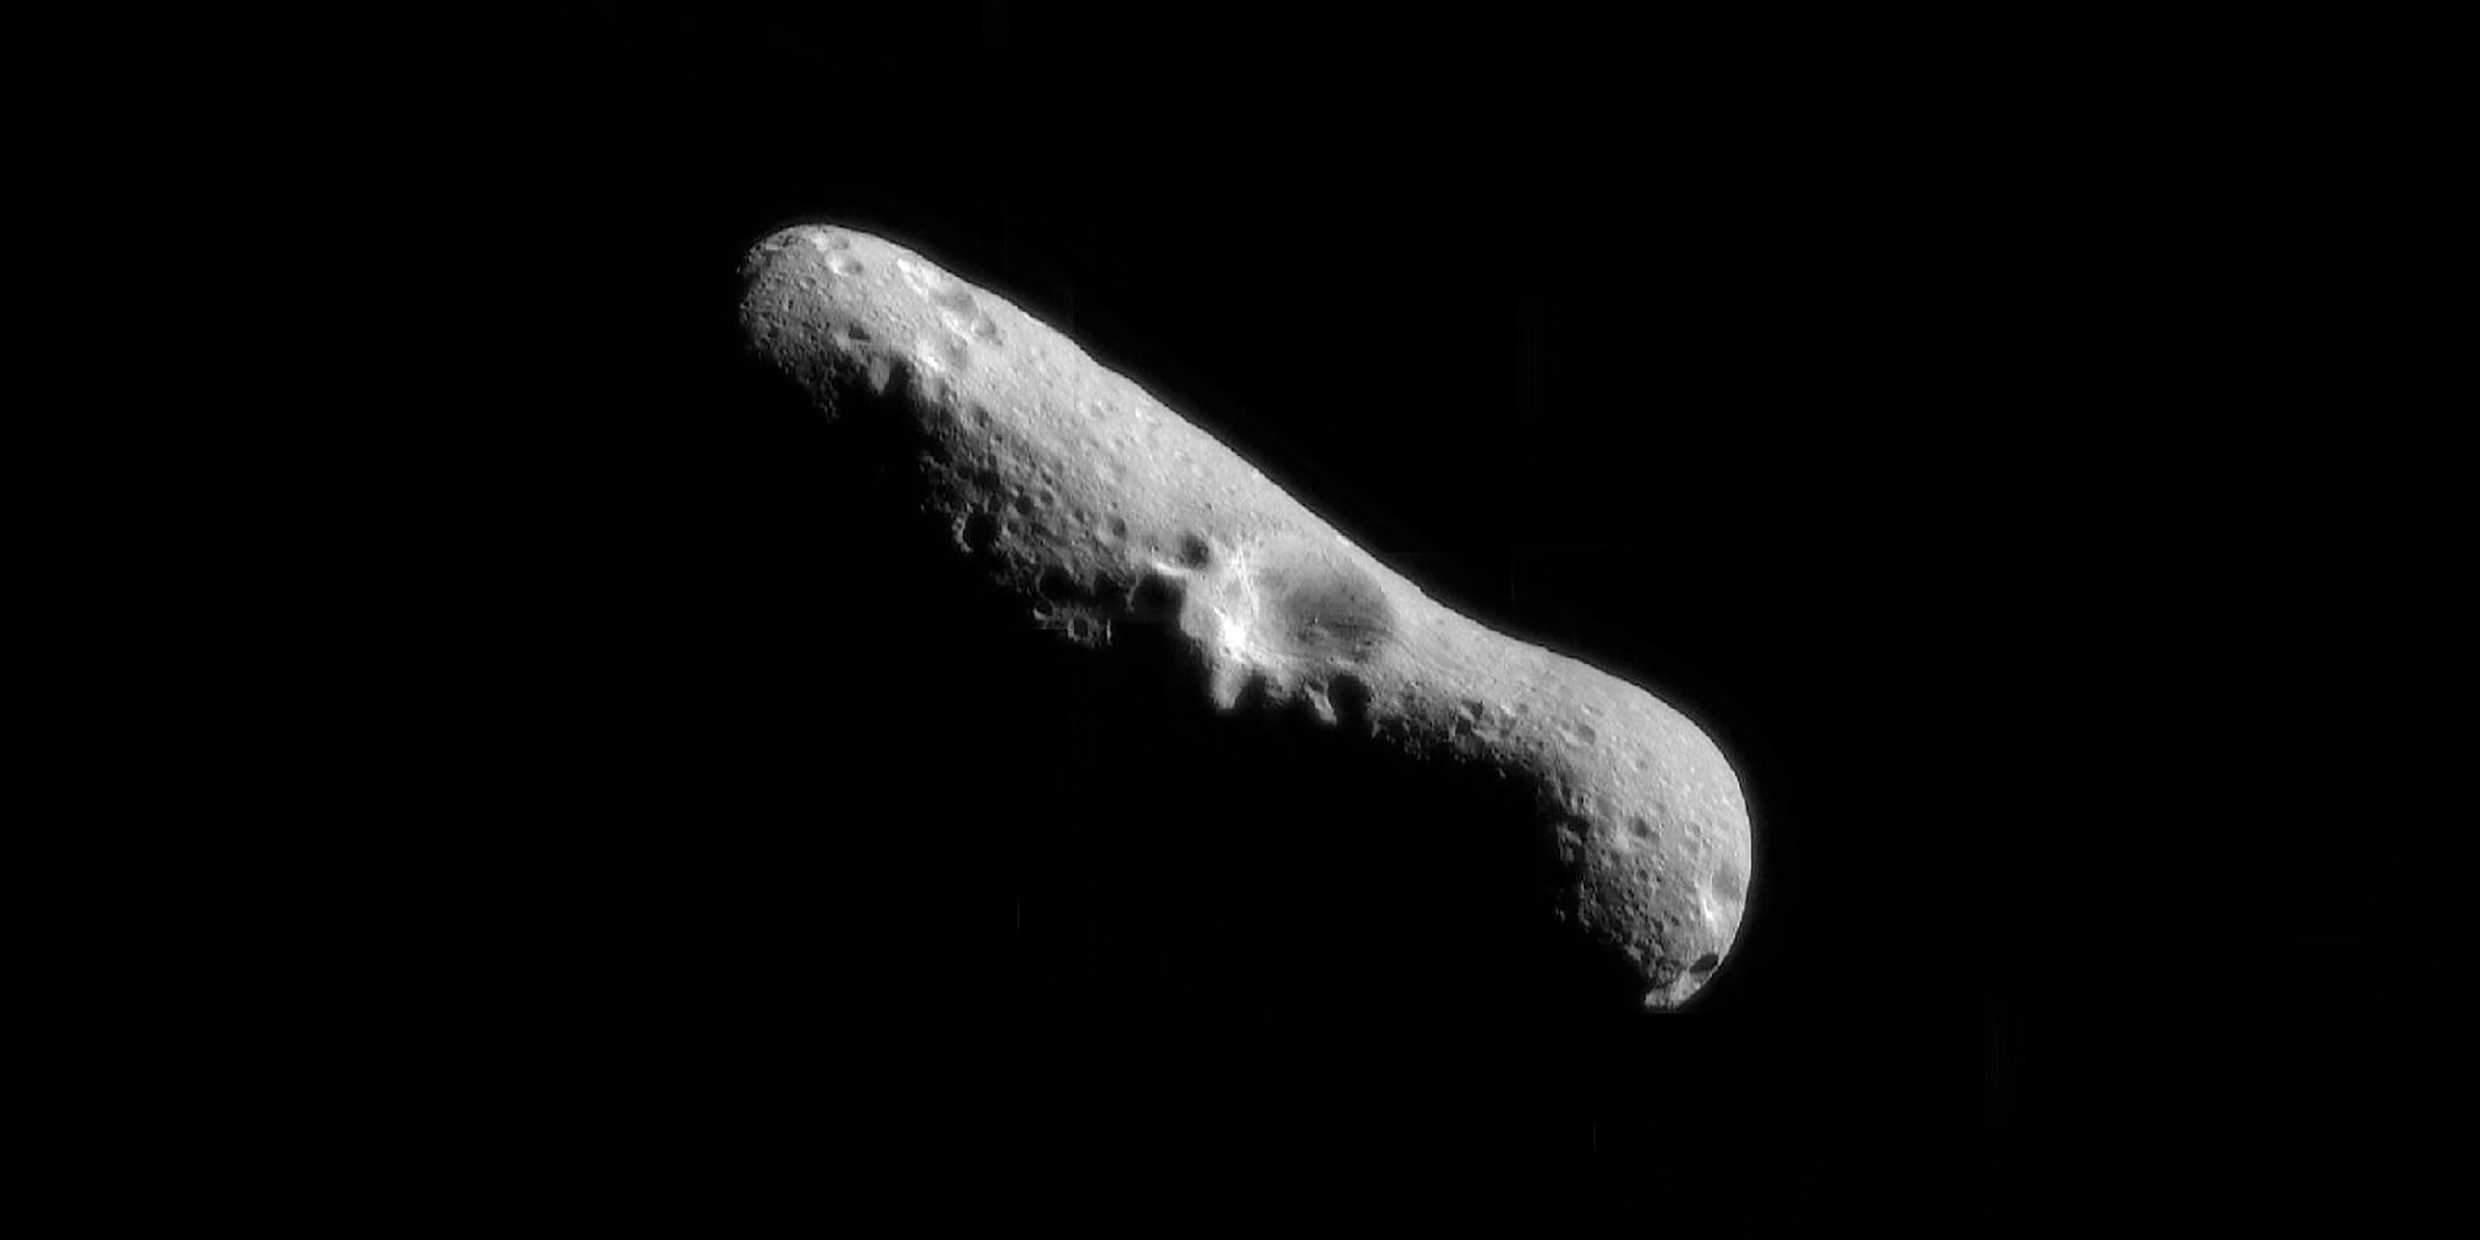 Image of a gray dusty asteroid in space